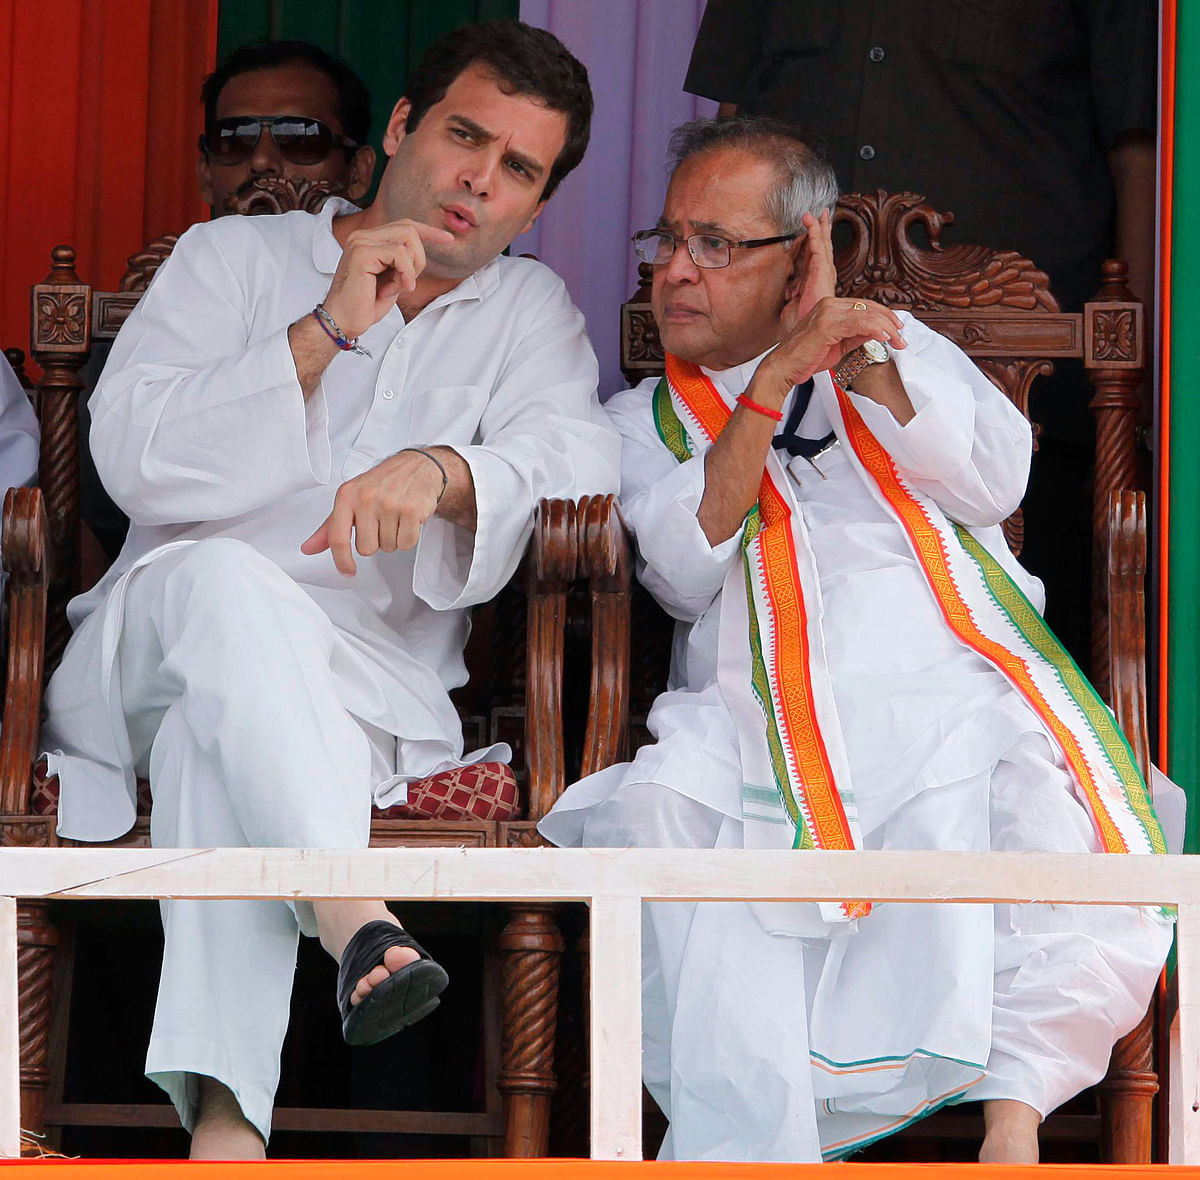 Since pre-independence, wearing white has been seen as a sign of sacrificing luxury by political leaders in India. 